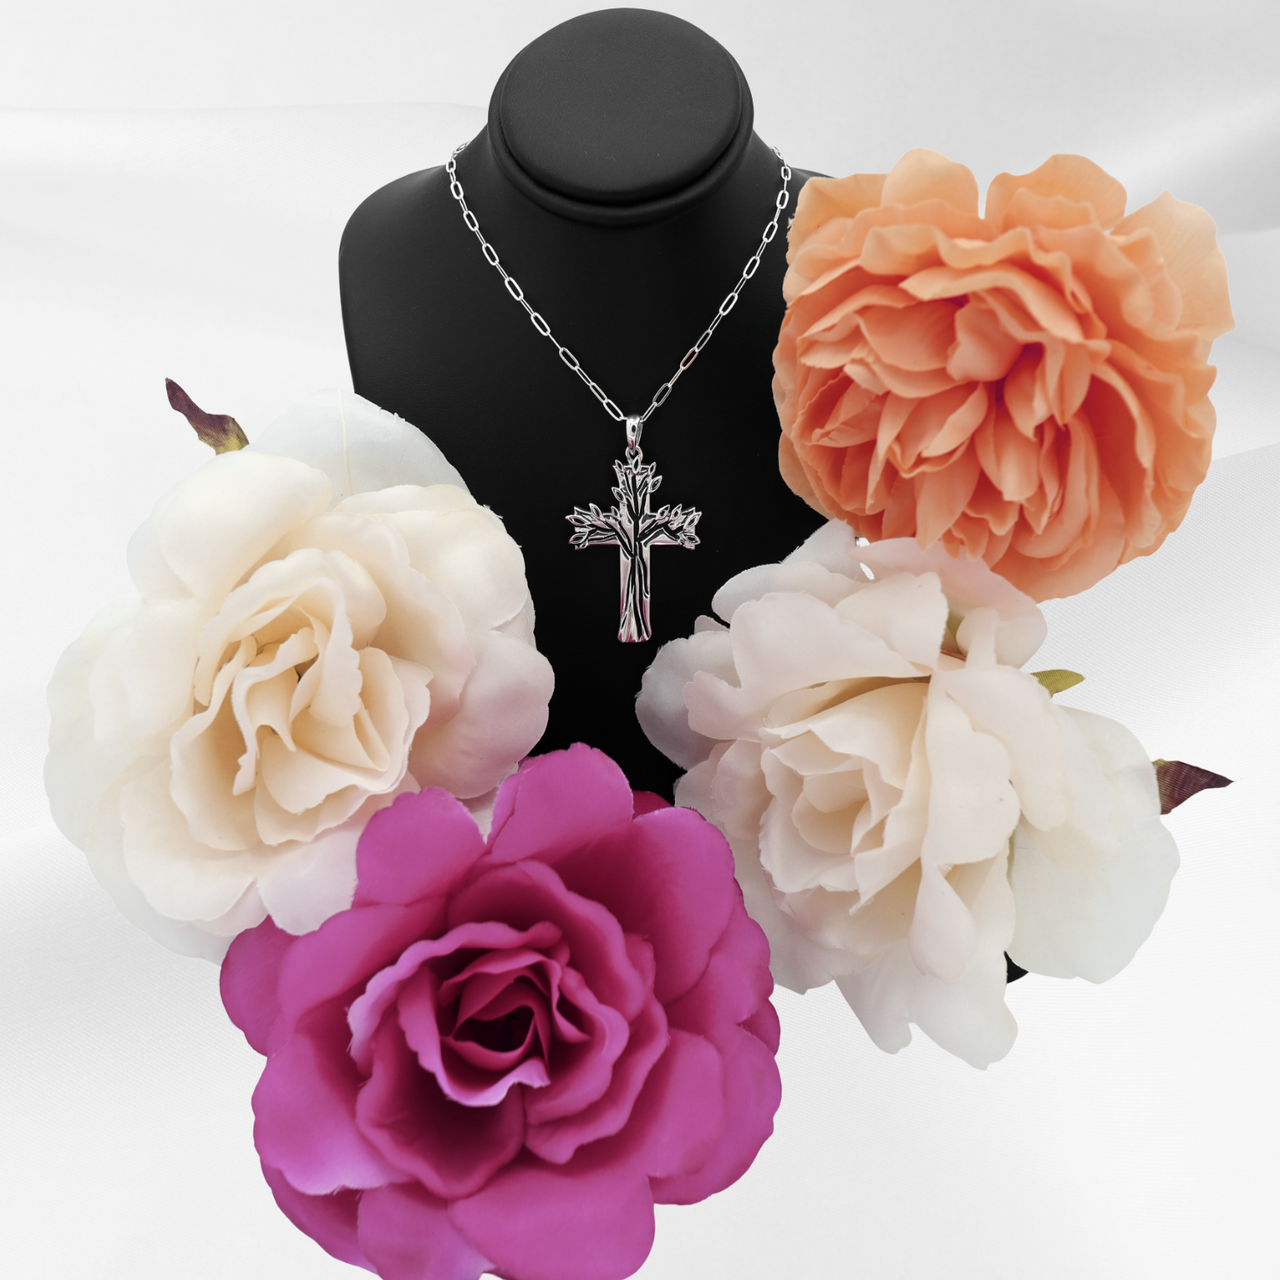 Immortality in Christ™ Sterling Silver Cross Pendant with 18 inch Sterling Silver Chain